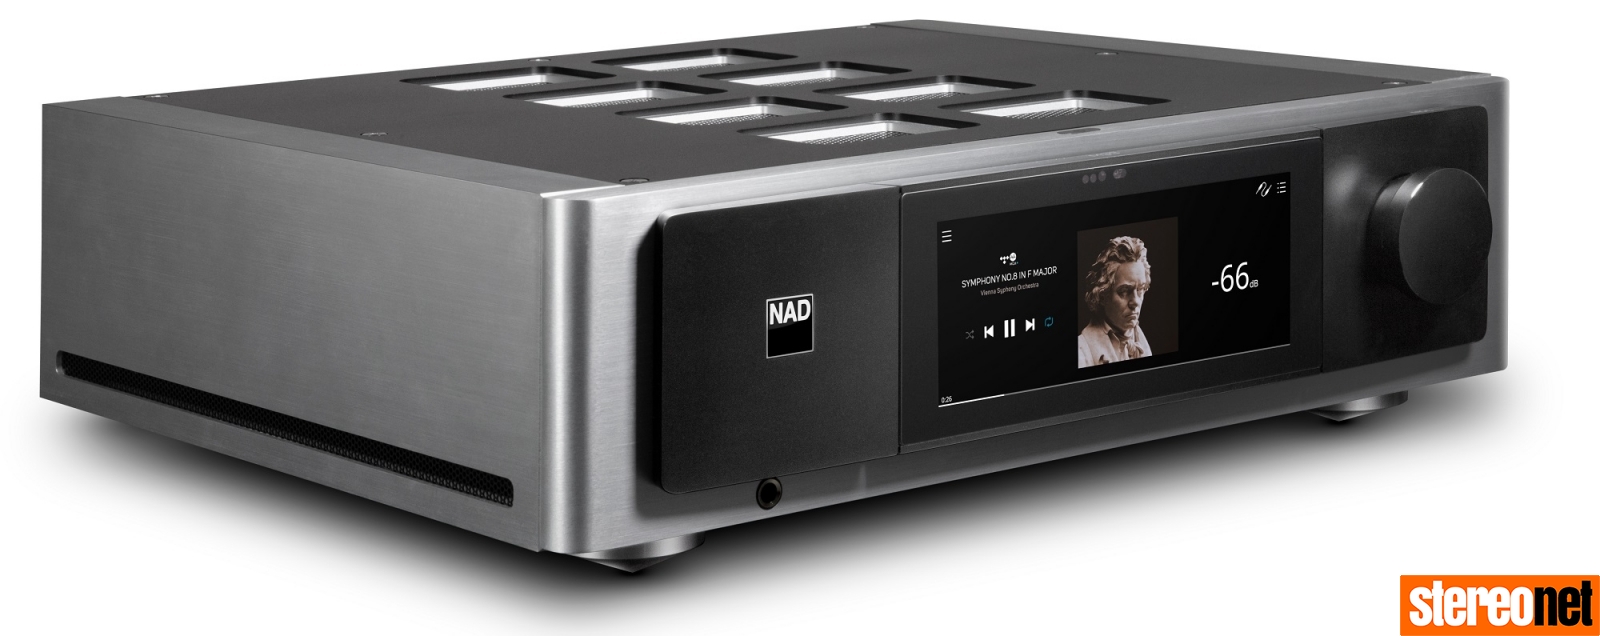 NAD M33 Master Series CES 2020